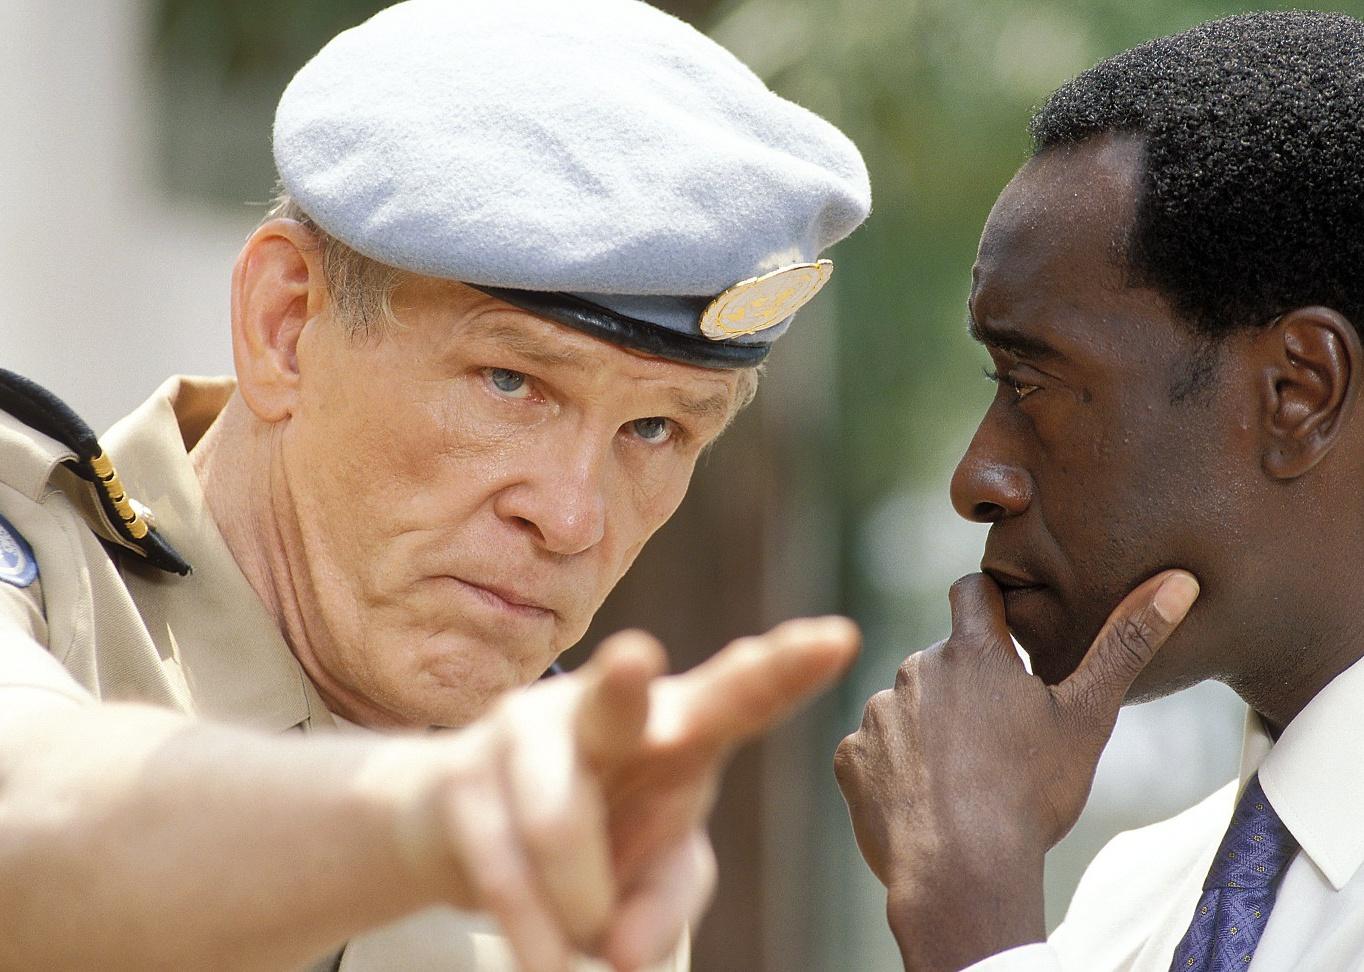 Nick Nolte in a military uniform pointing at something as he speaks to Don Cheadle.